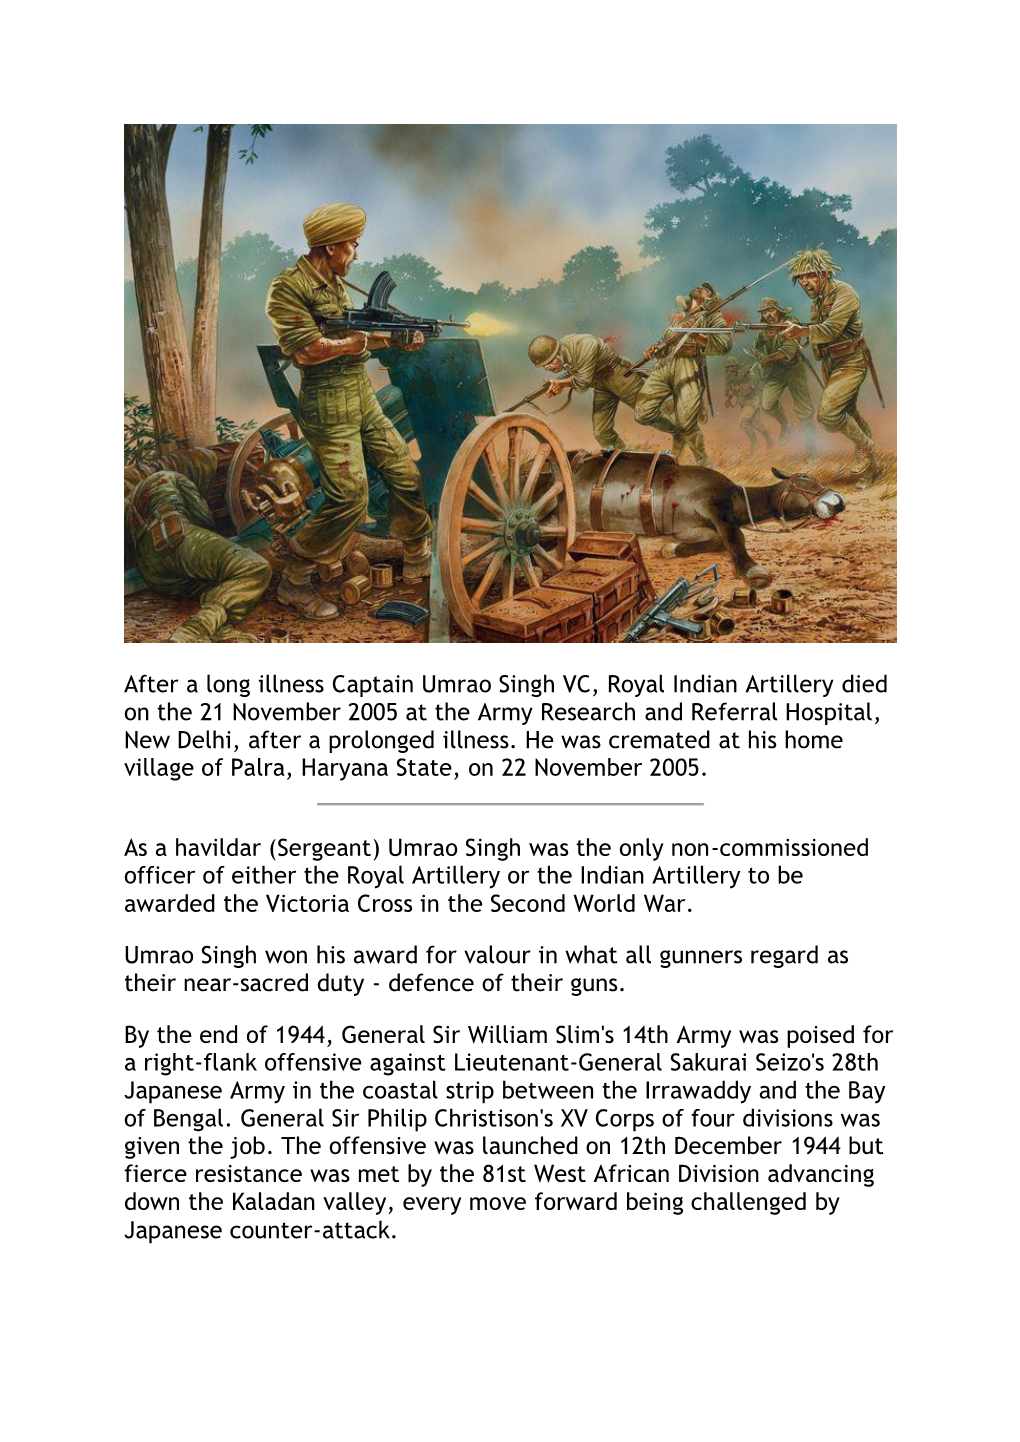 After a Long Illness Captain Umrao Singh VC, Royal Indian Artillery Died on the 21 November 2005 at the Army Research and Referr